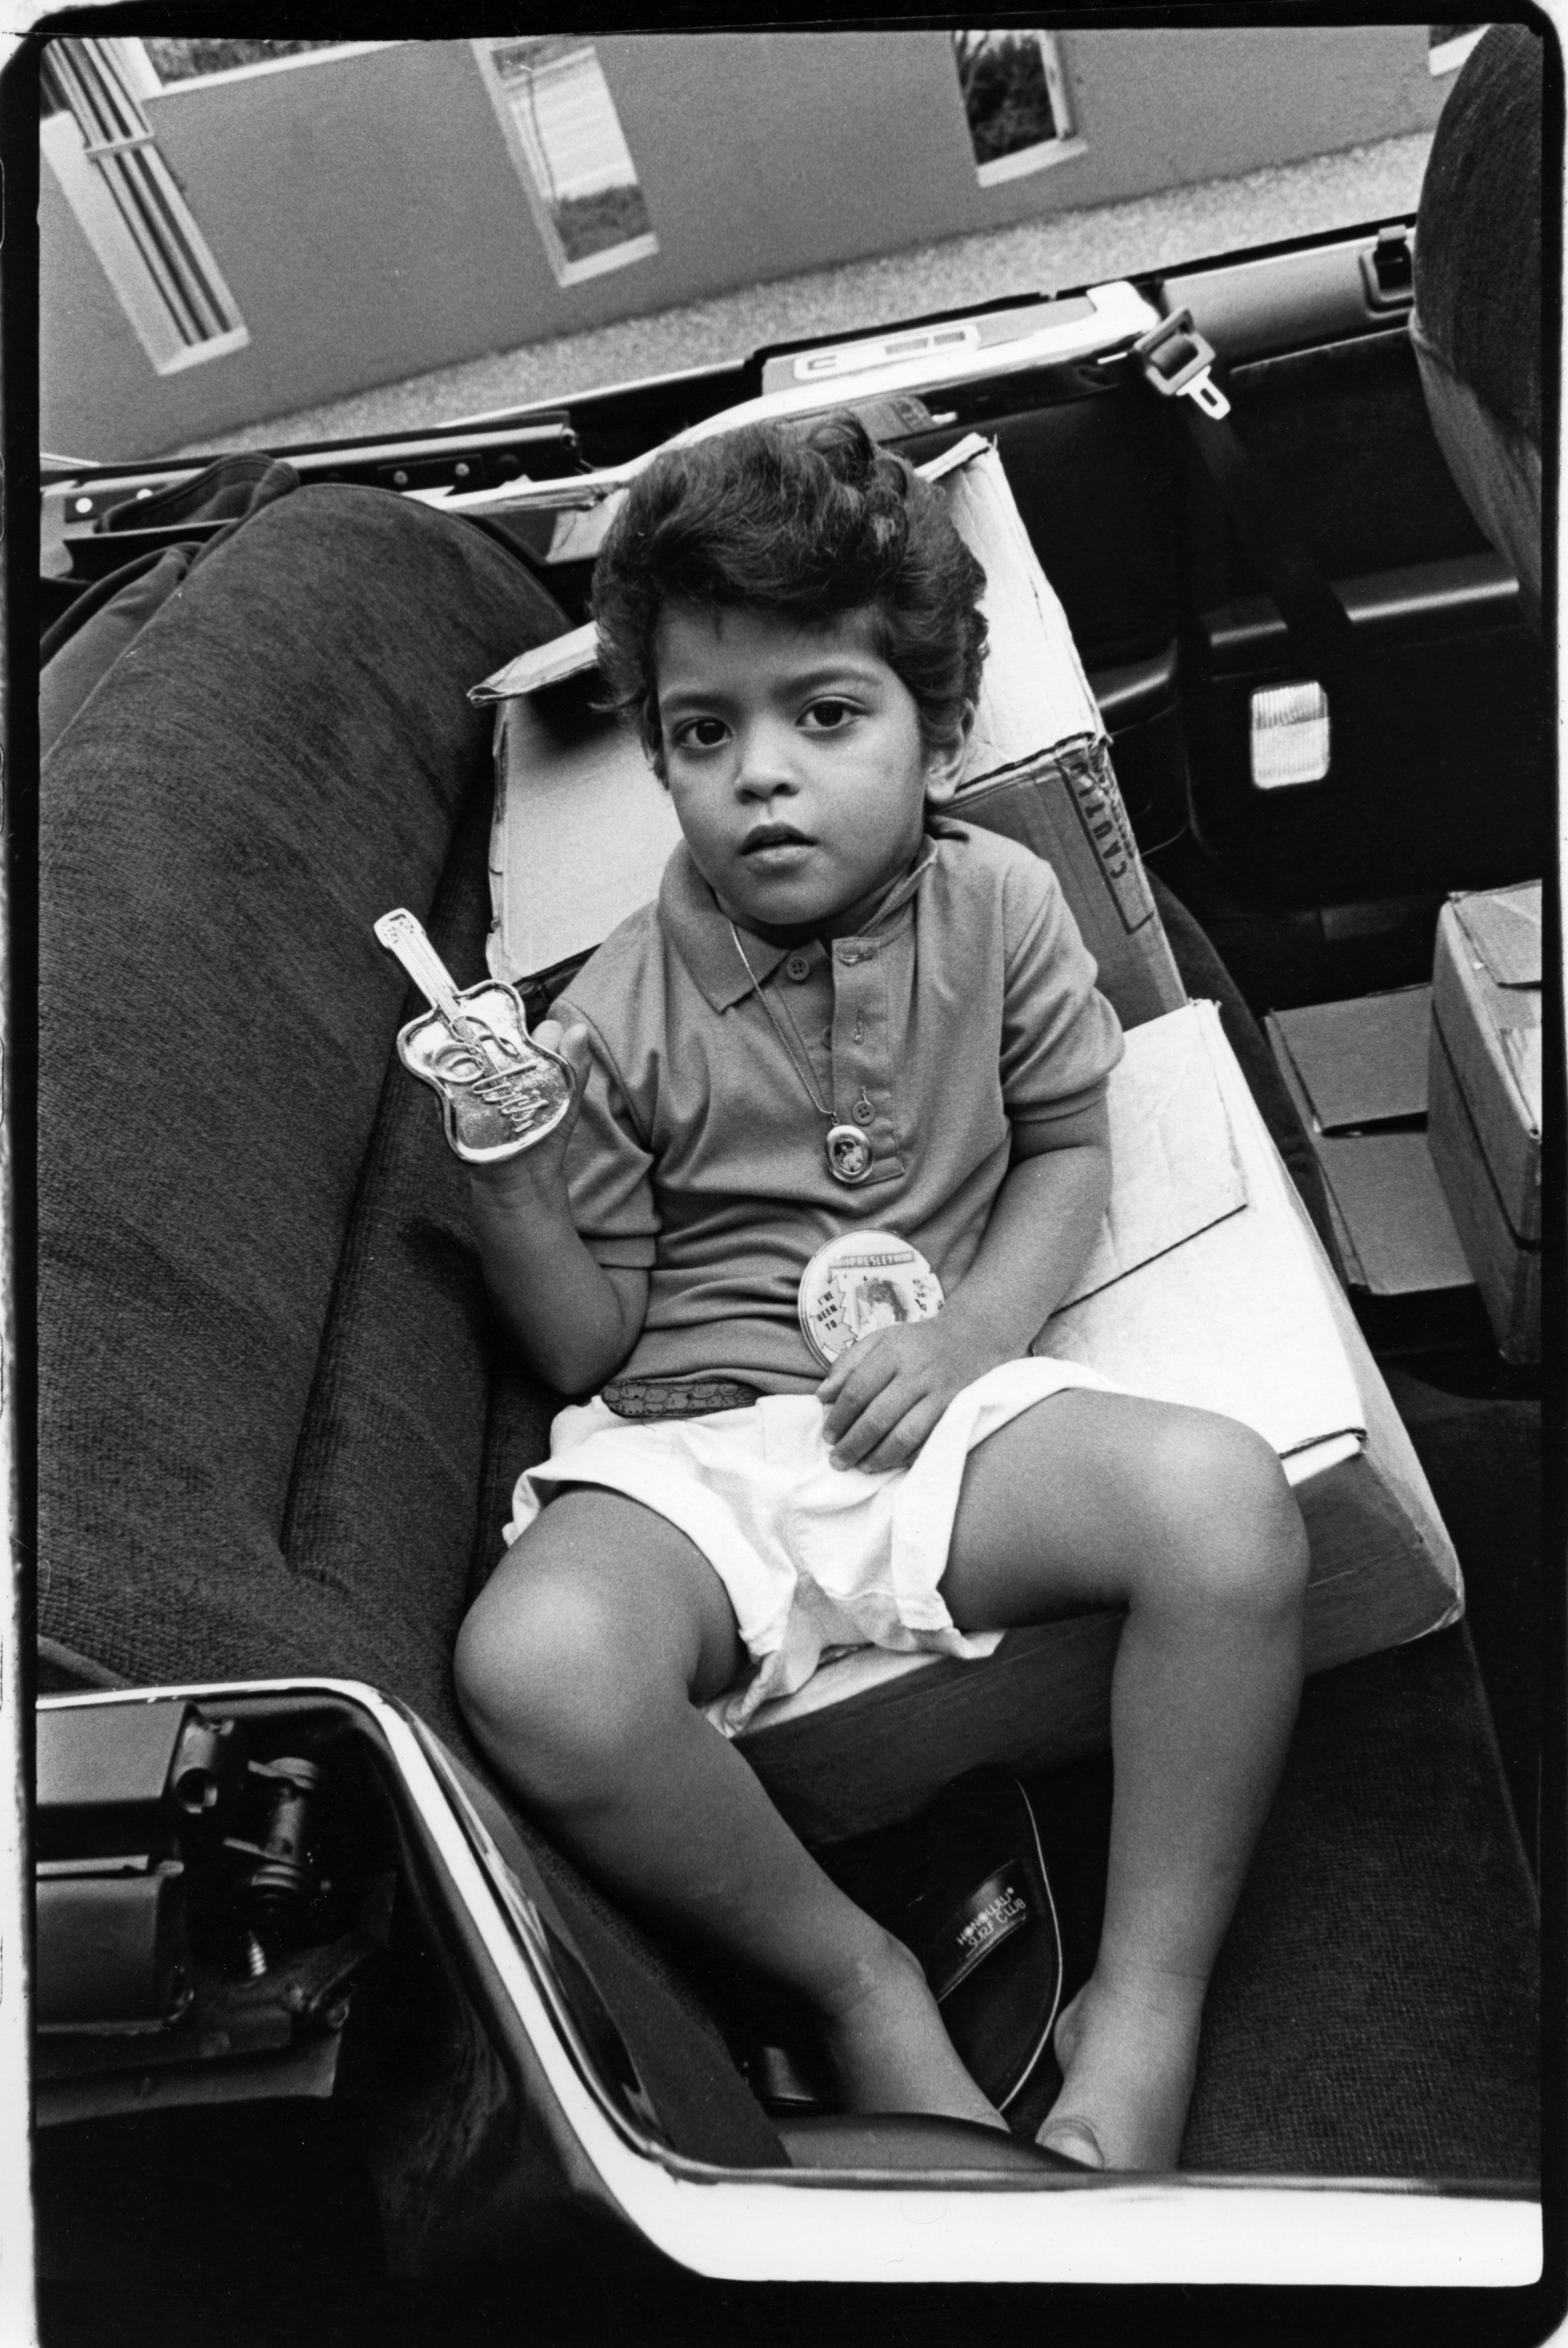 Former child prodigy Bruno Mars as a four year old Elvis Presley impersonator in August 1990 in Memphis, Tennessee. / Source: Getty Images